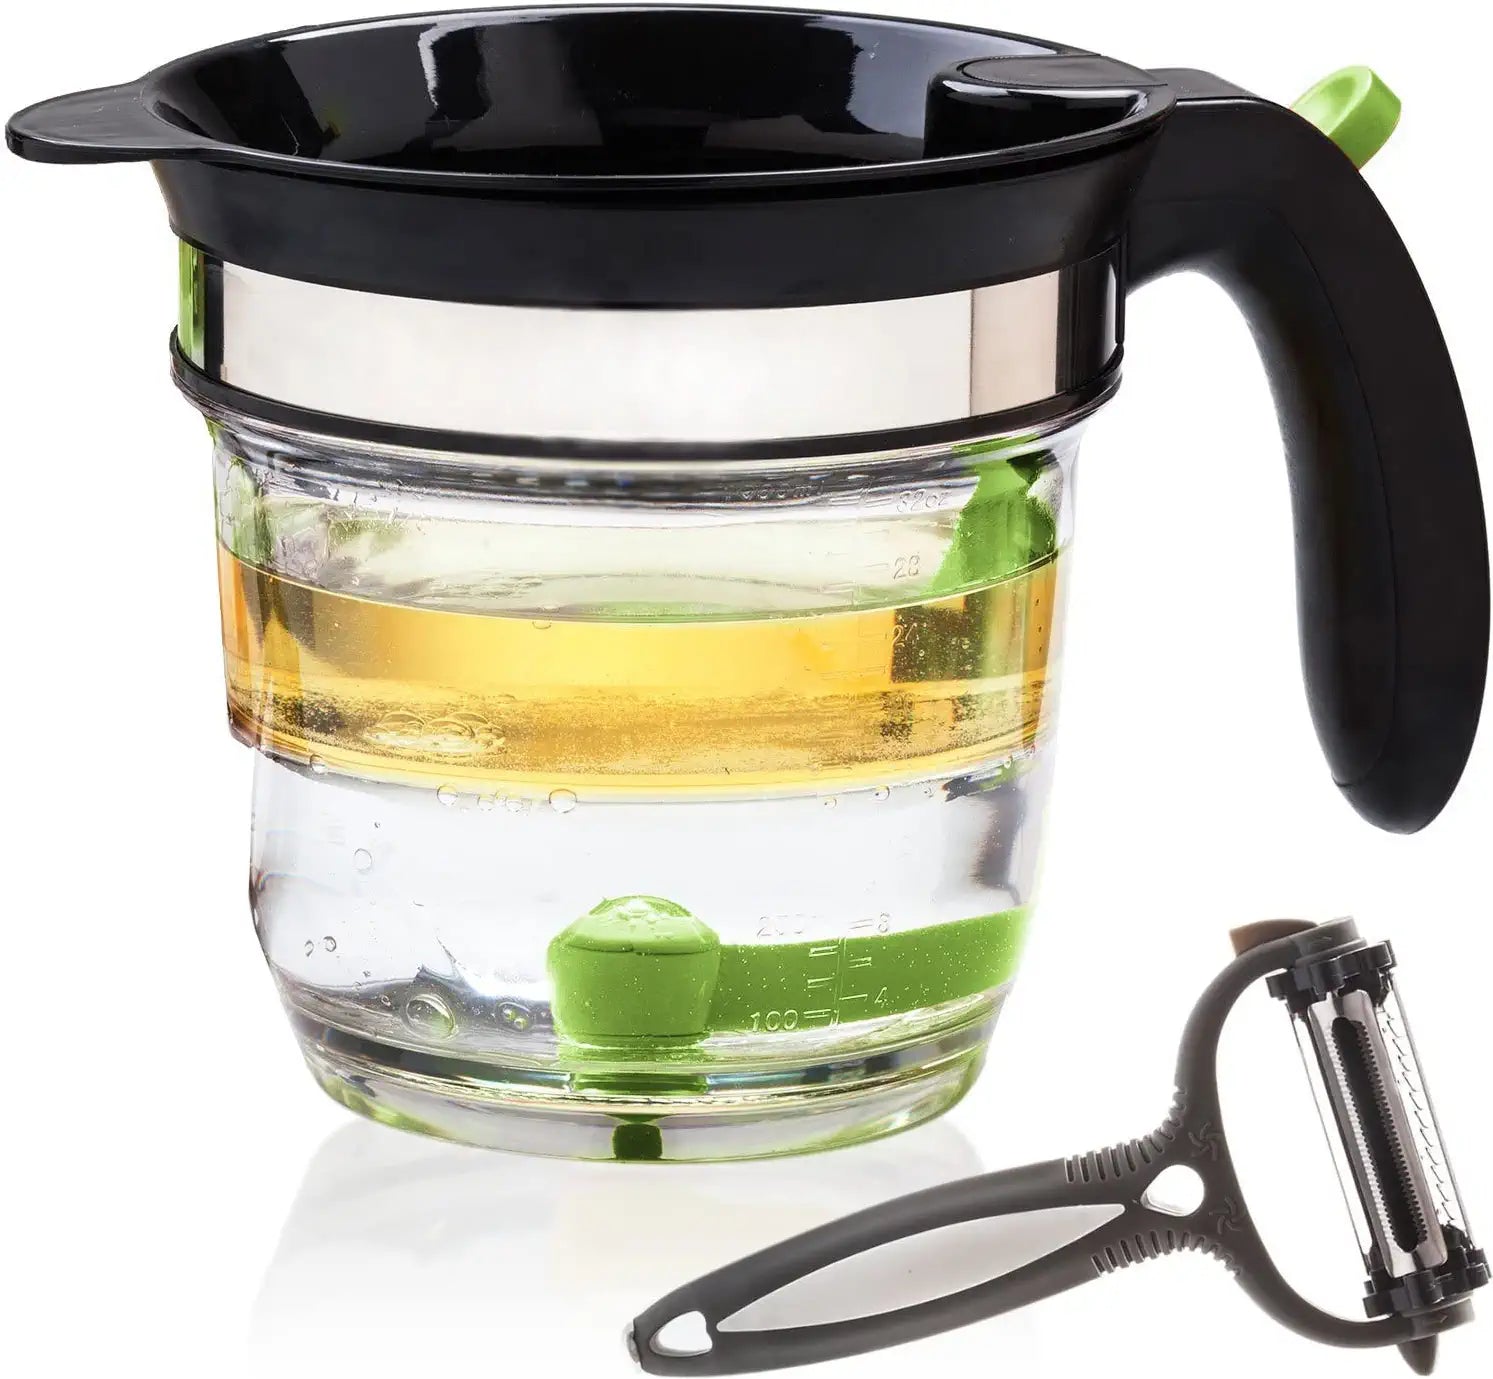 Grease Separator, 4 Cup Gravy Separator for Cooking with Oil Strainer with a 3-in-1 Multifunctional Peeler (Green)